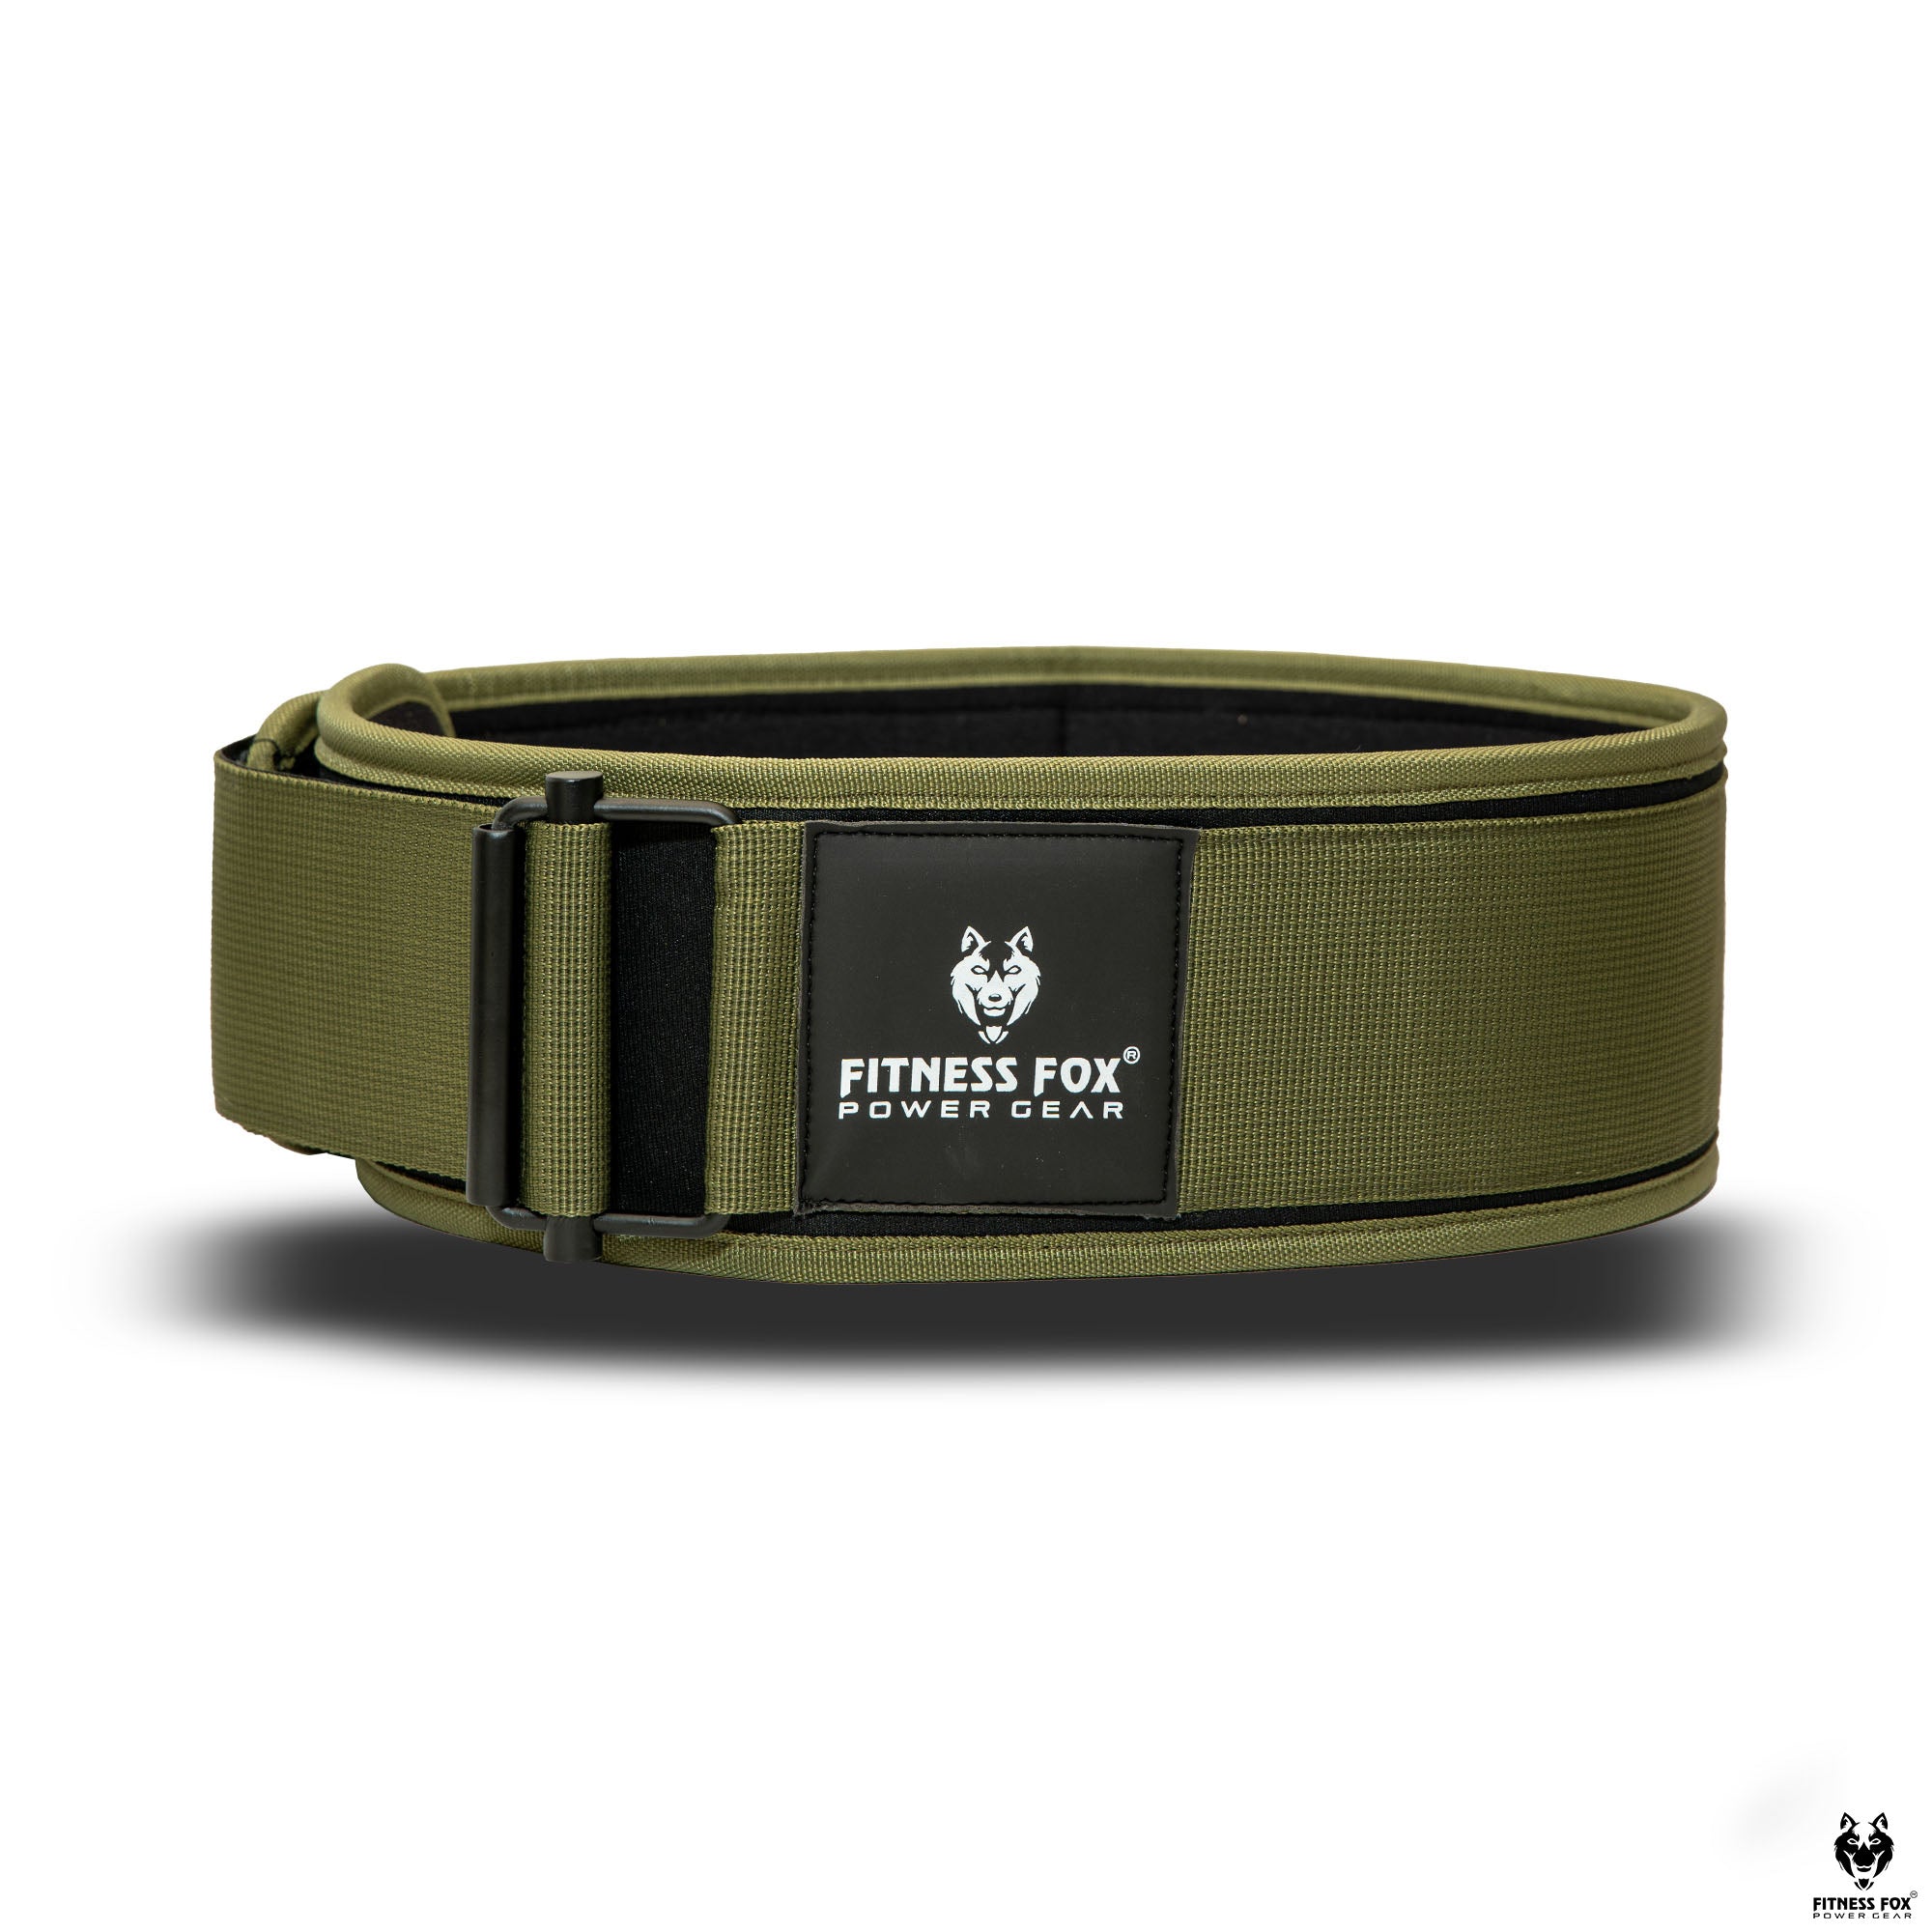 FITNESS FOX Quick Locking Weightlifting Nylon BELT for Crossfit & Bodybuilding & Powerlifting